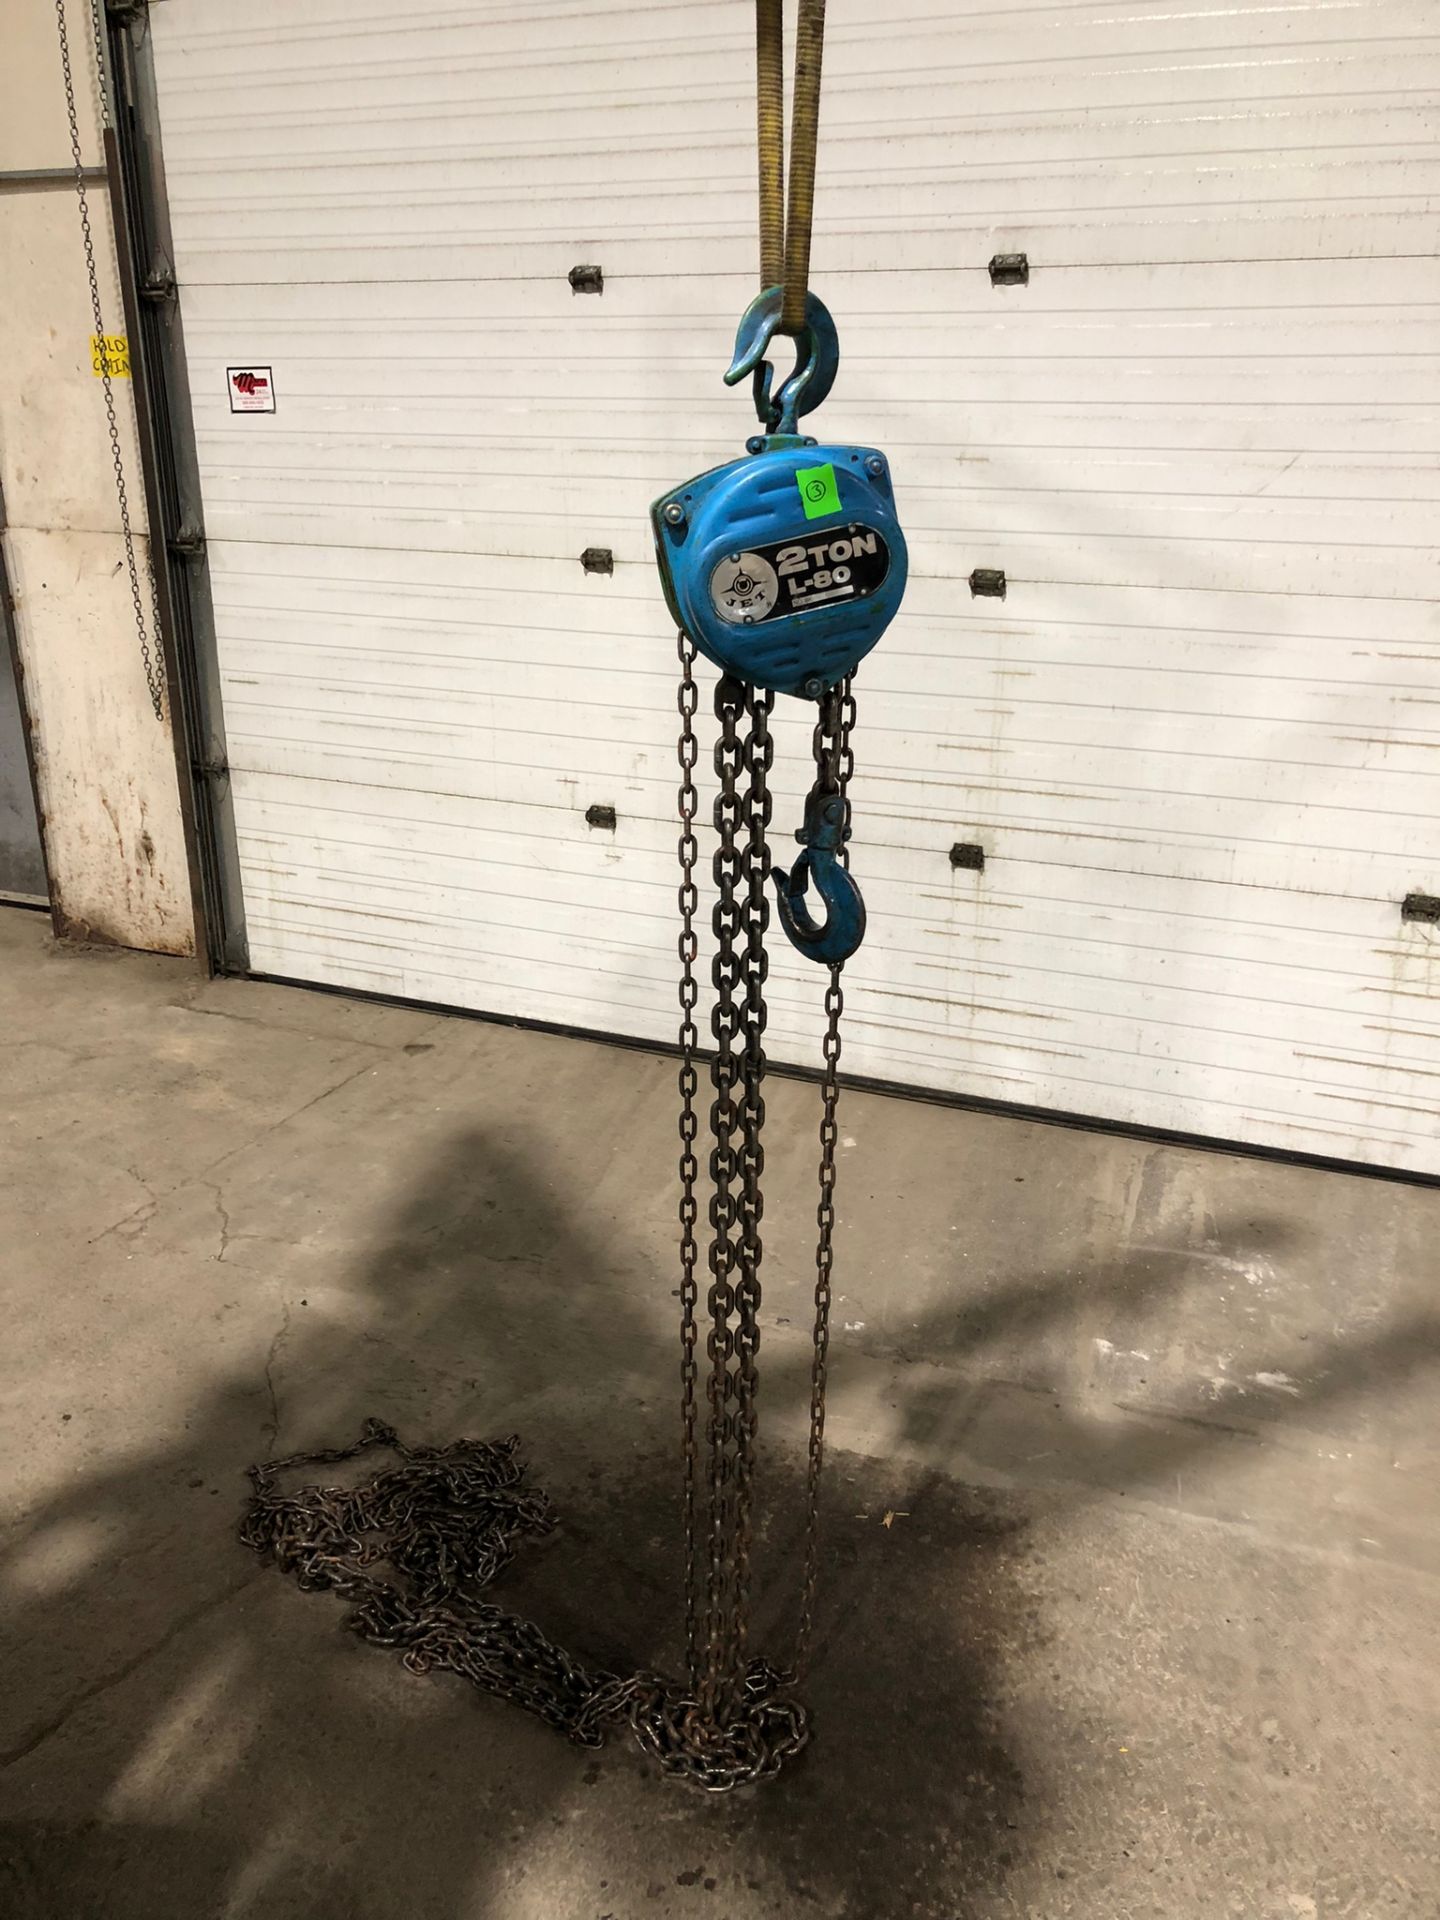 Jet 2 ton Capacity Chain Fall Hoist - 20' long with hoook - Image 2 of 3